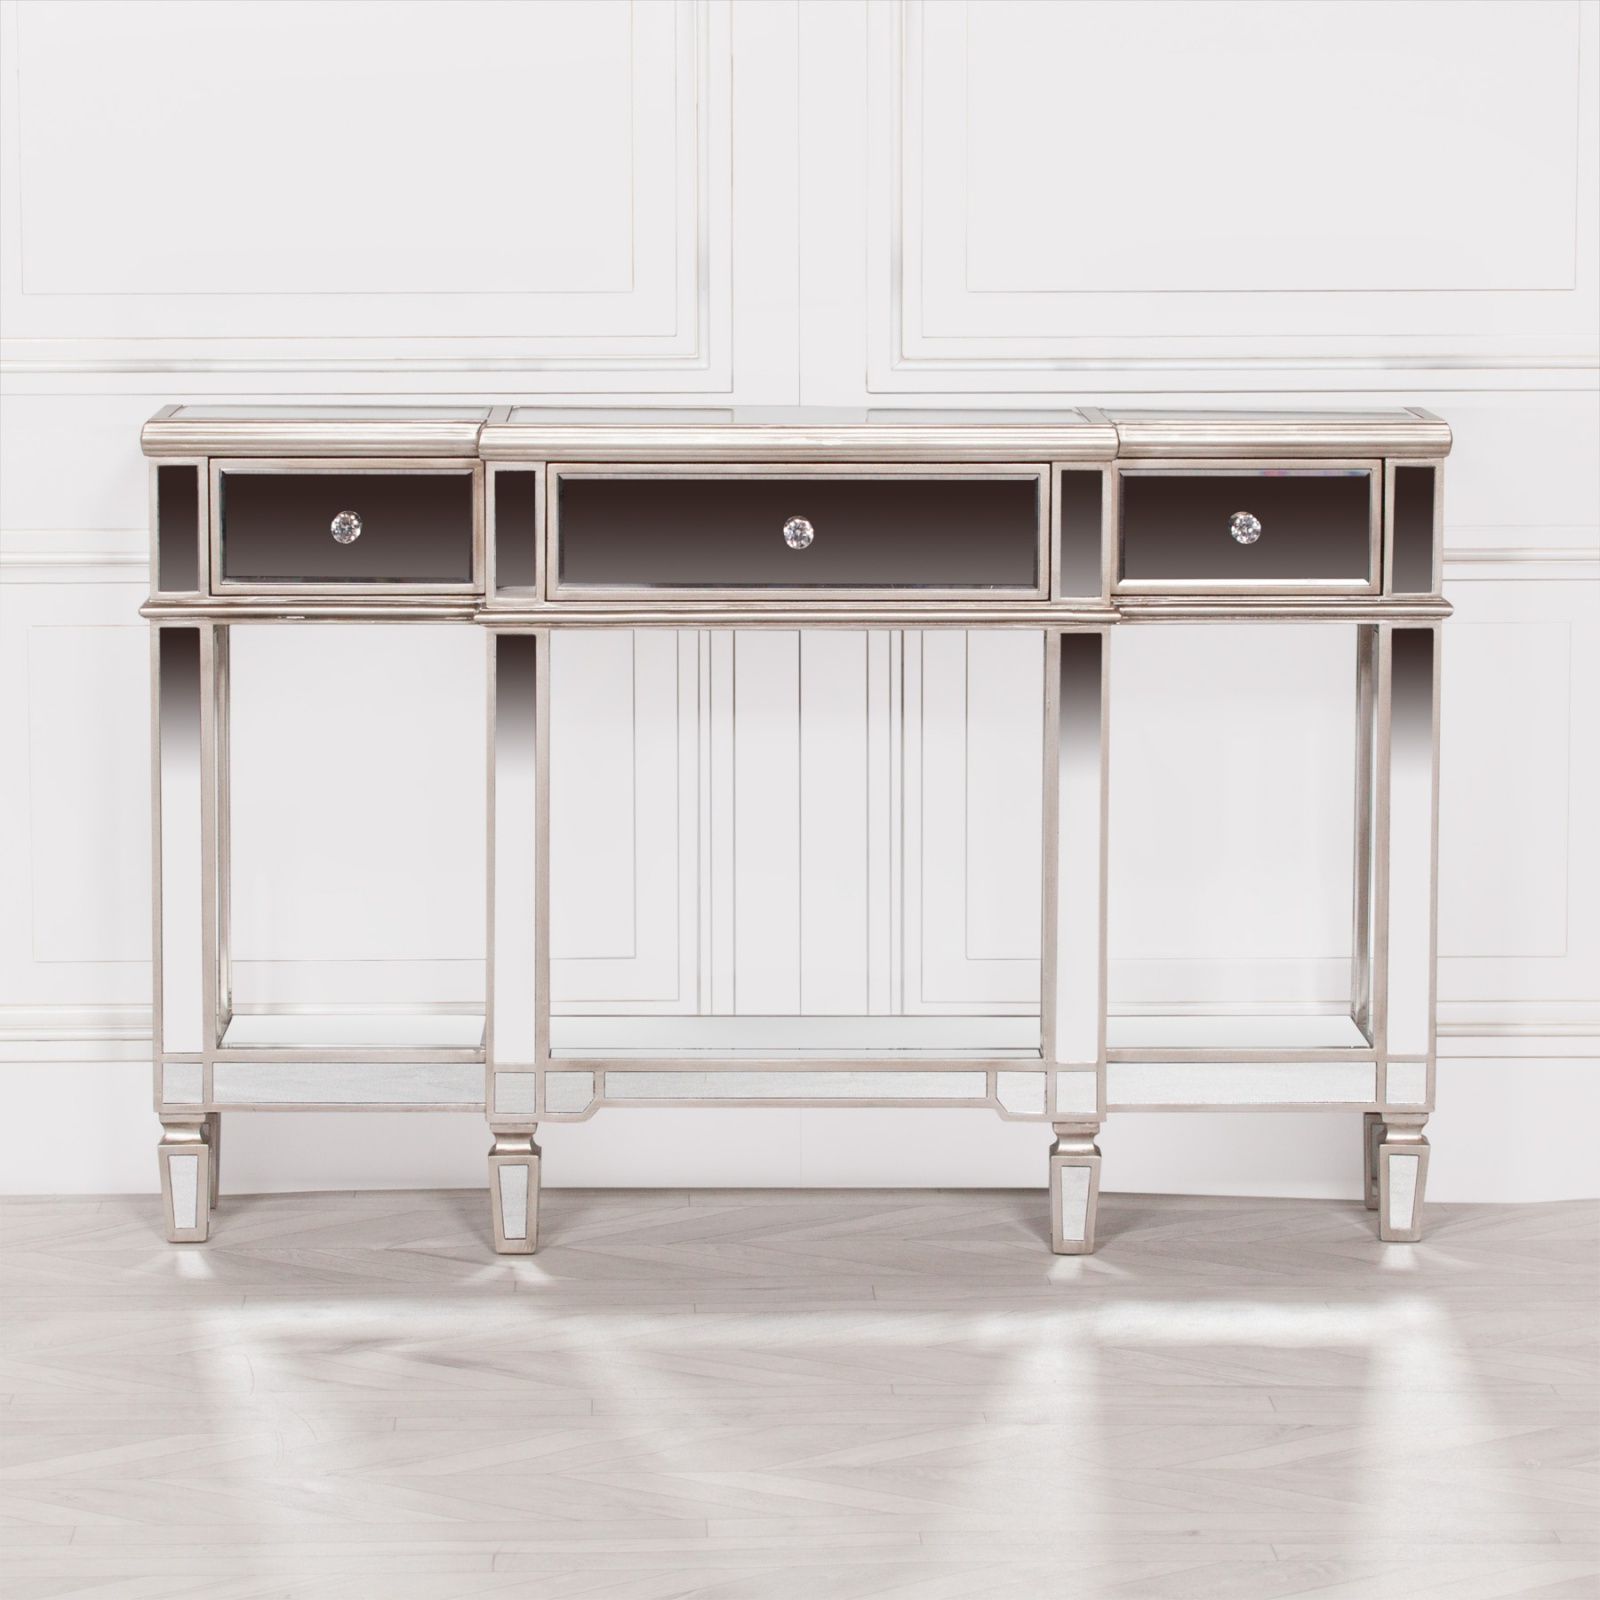 Silver Console Tables In Widely Used Venetian Hall Demilune Mirrored Silver Console Table (View 7 of 10)